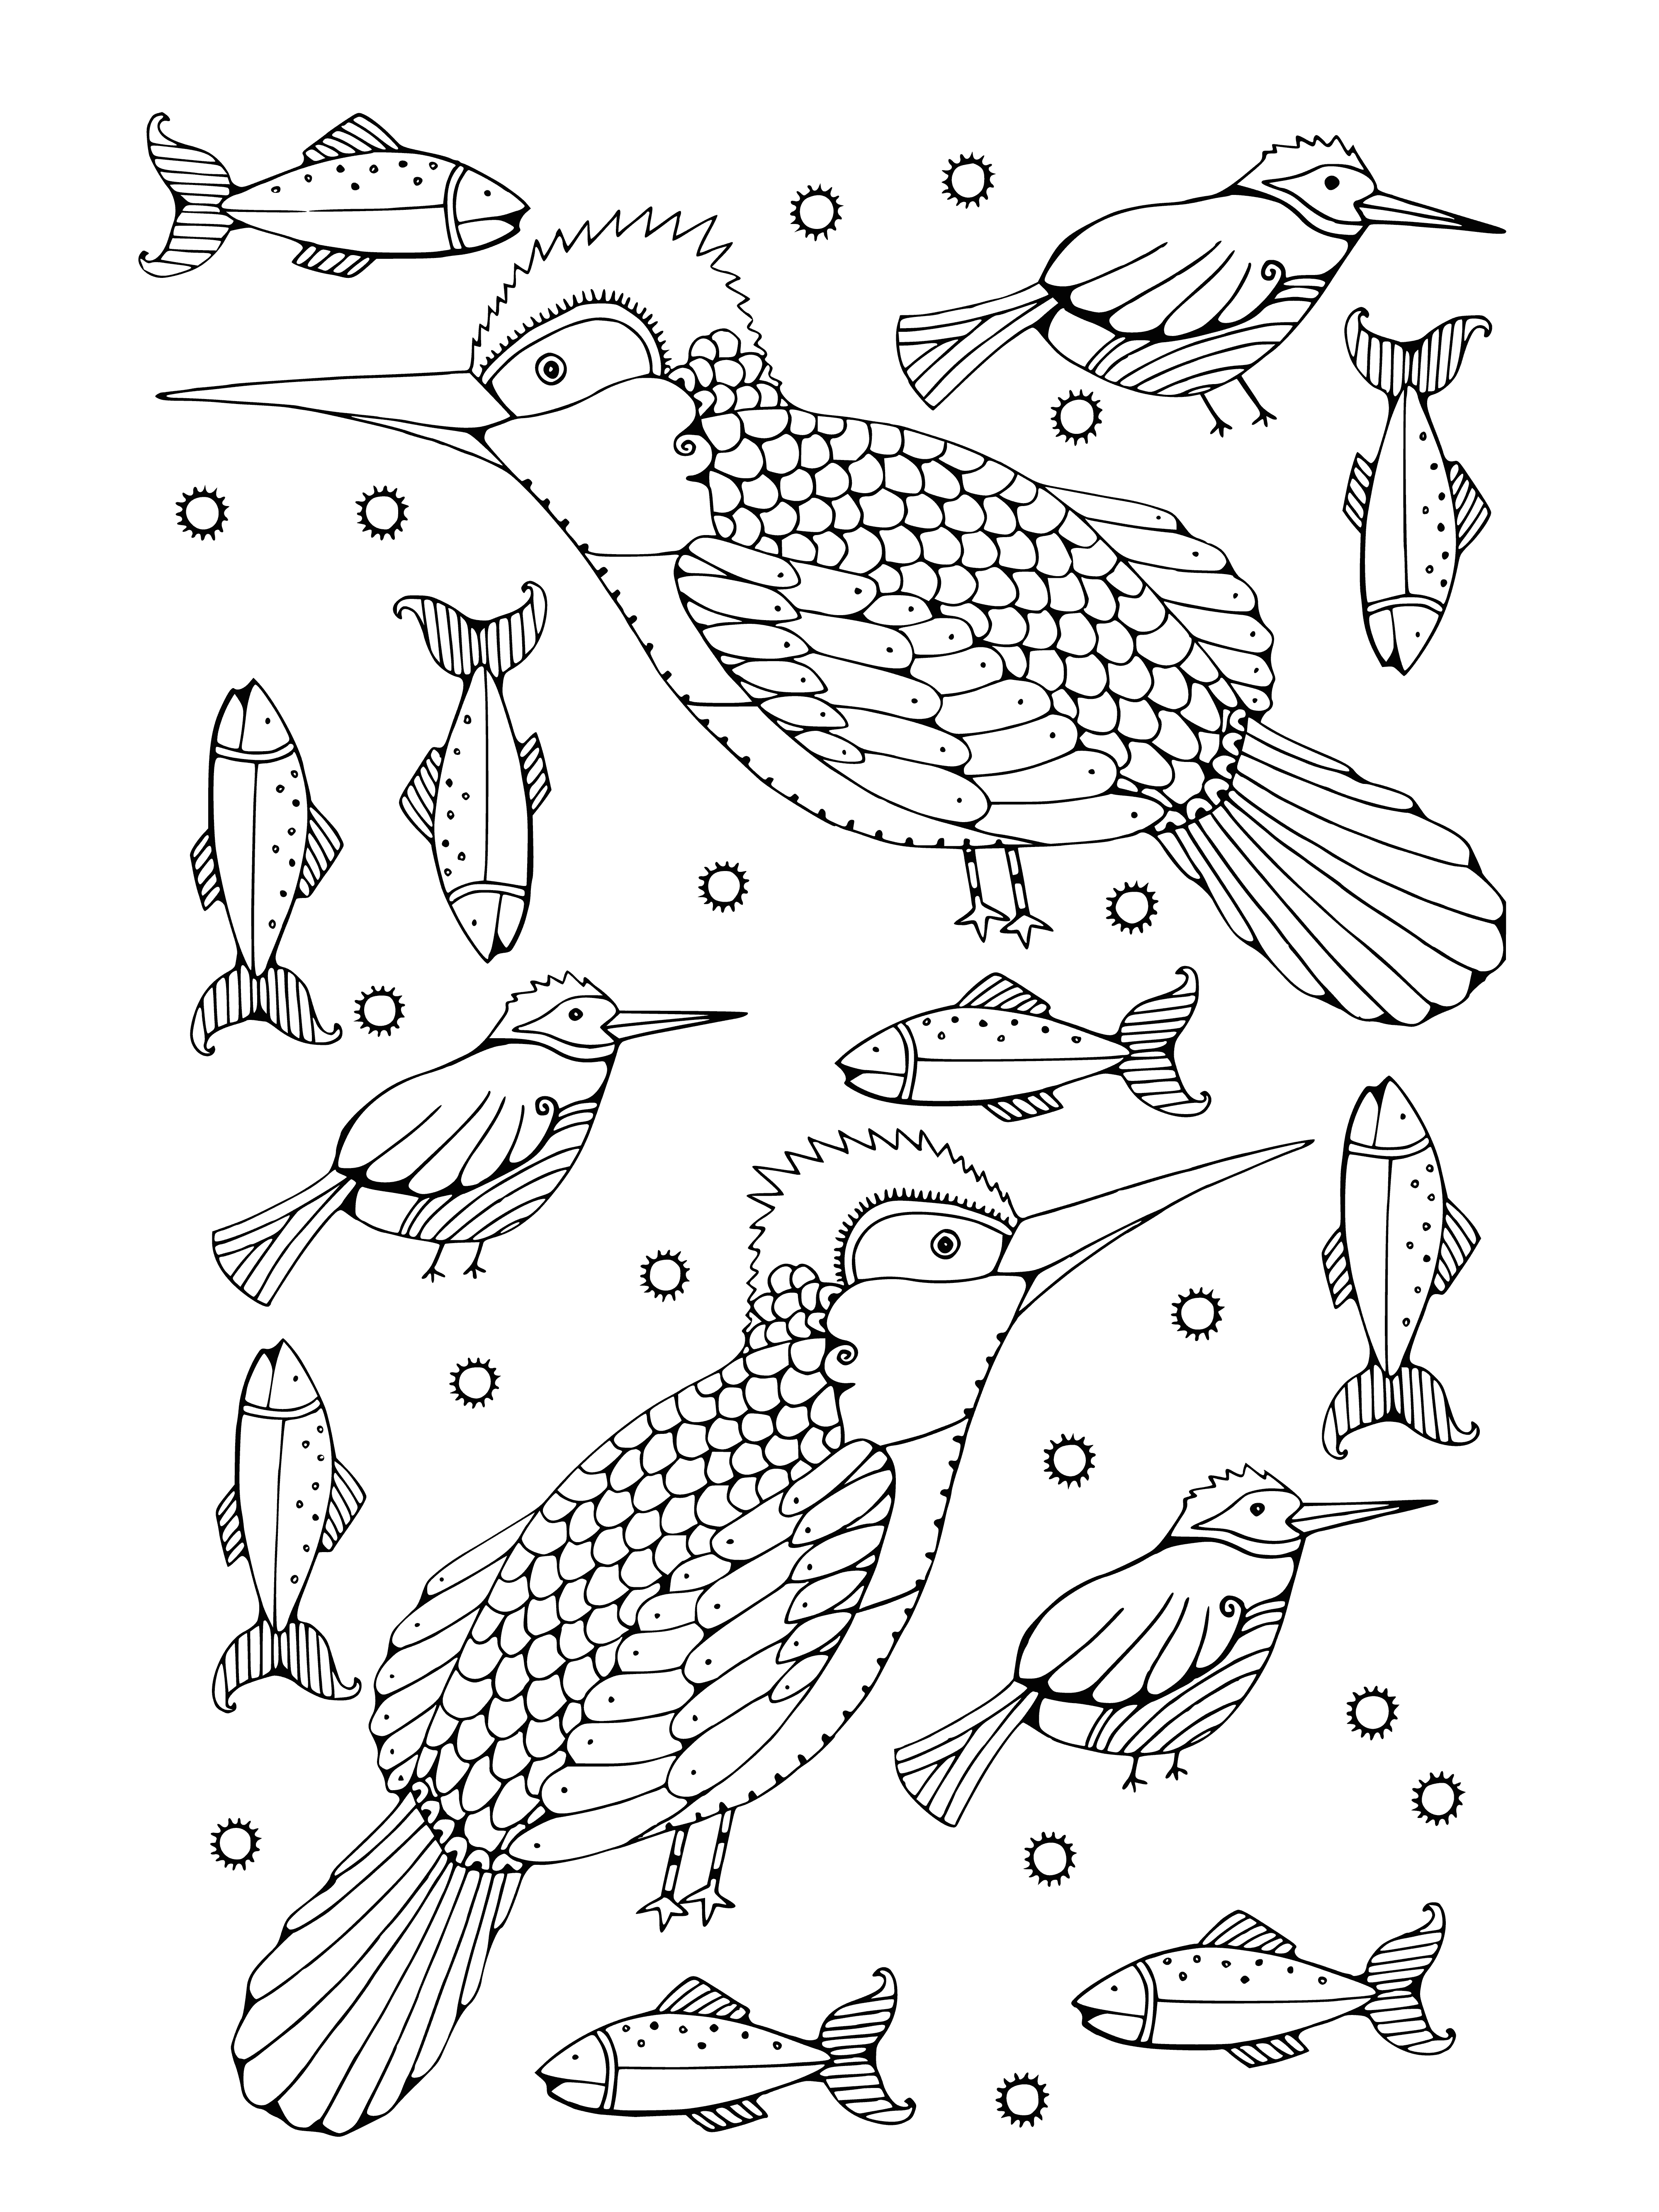 Kingfisher coloring page